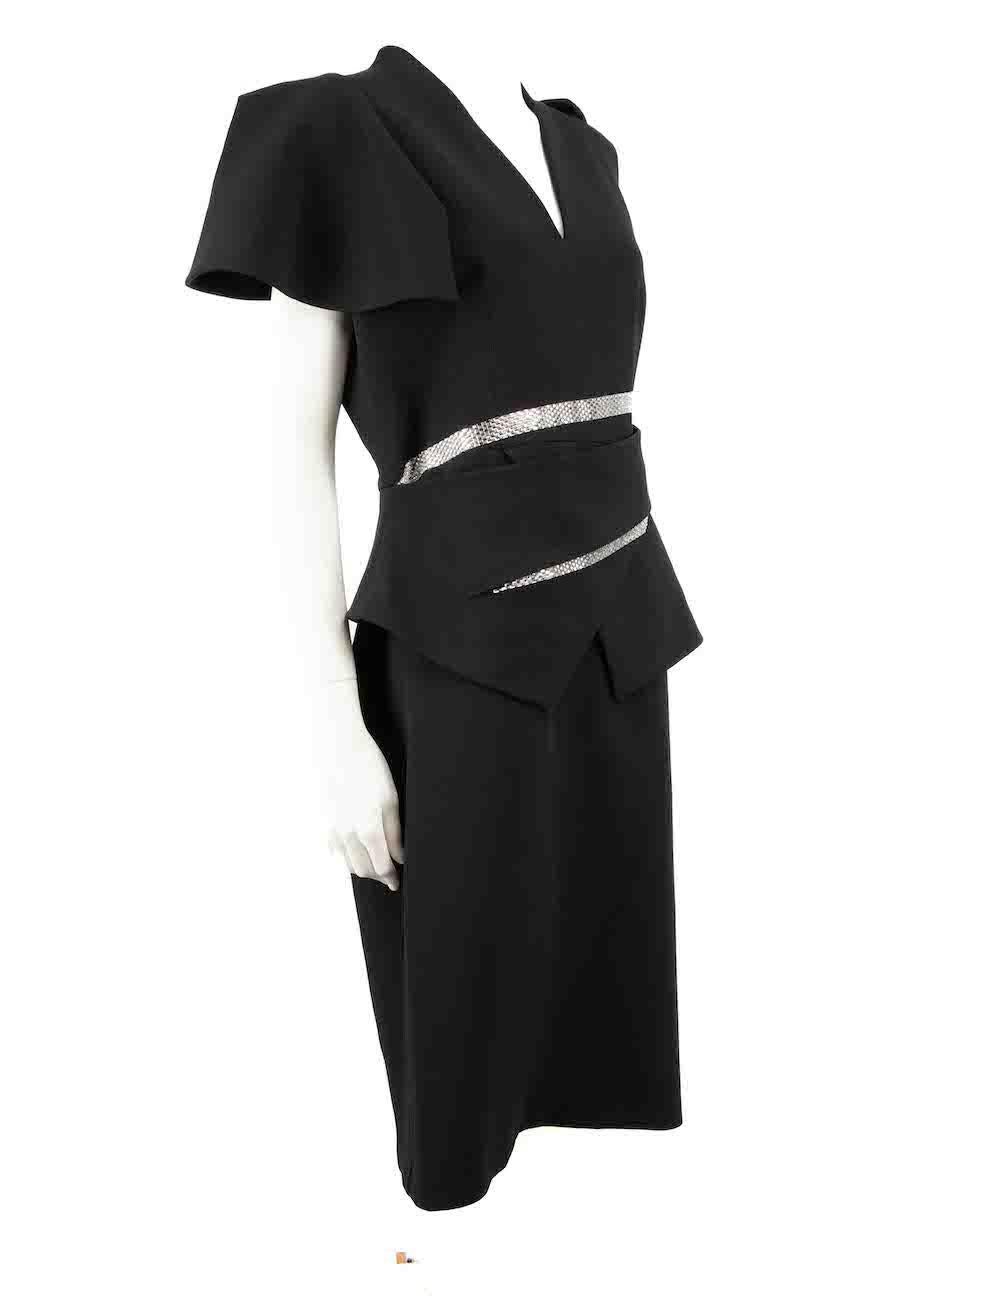 CONDITION is Never worn, with tags. No visible wear to dress is evident on this new Safiyaa designer resale item.
 
 
 
 Details
 
 
 Black
 
 Polyester
 
 Midi dress
 
 V neckline
 
 Crystal embellished detail
 
 Back zip closure
 
 
 
 
 
 Made in